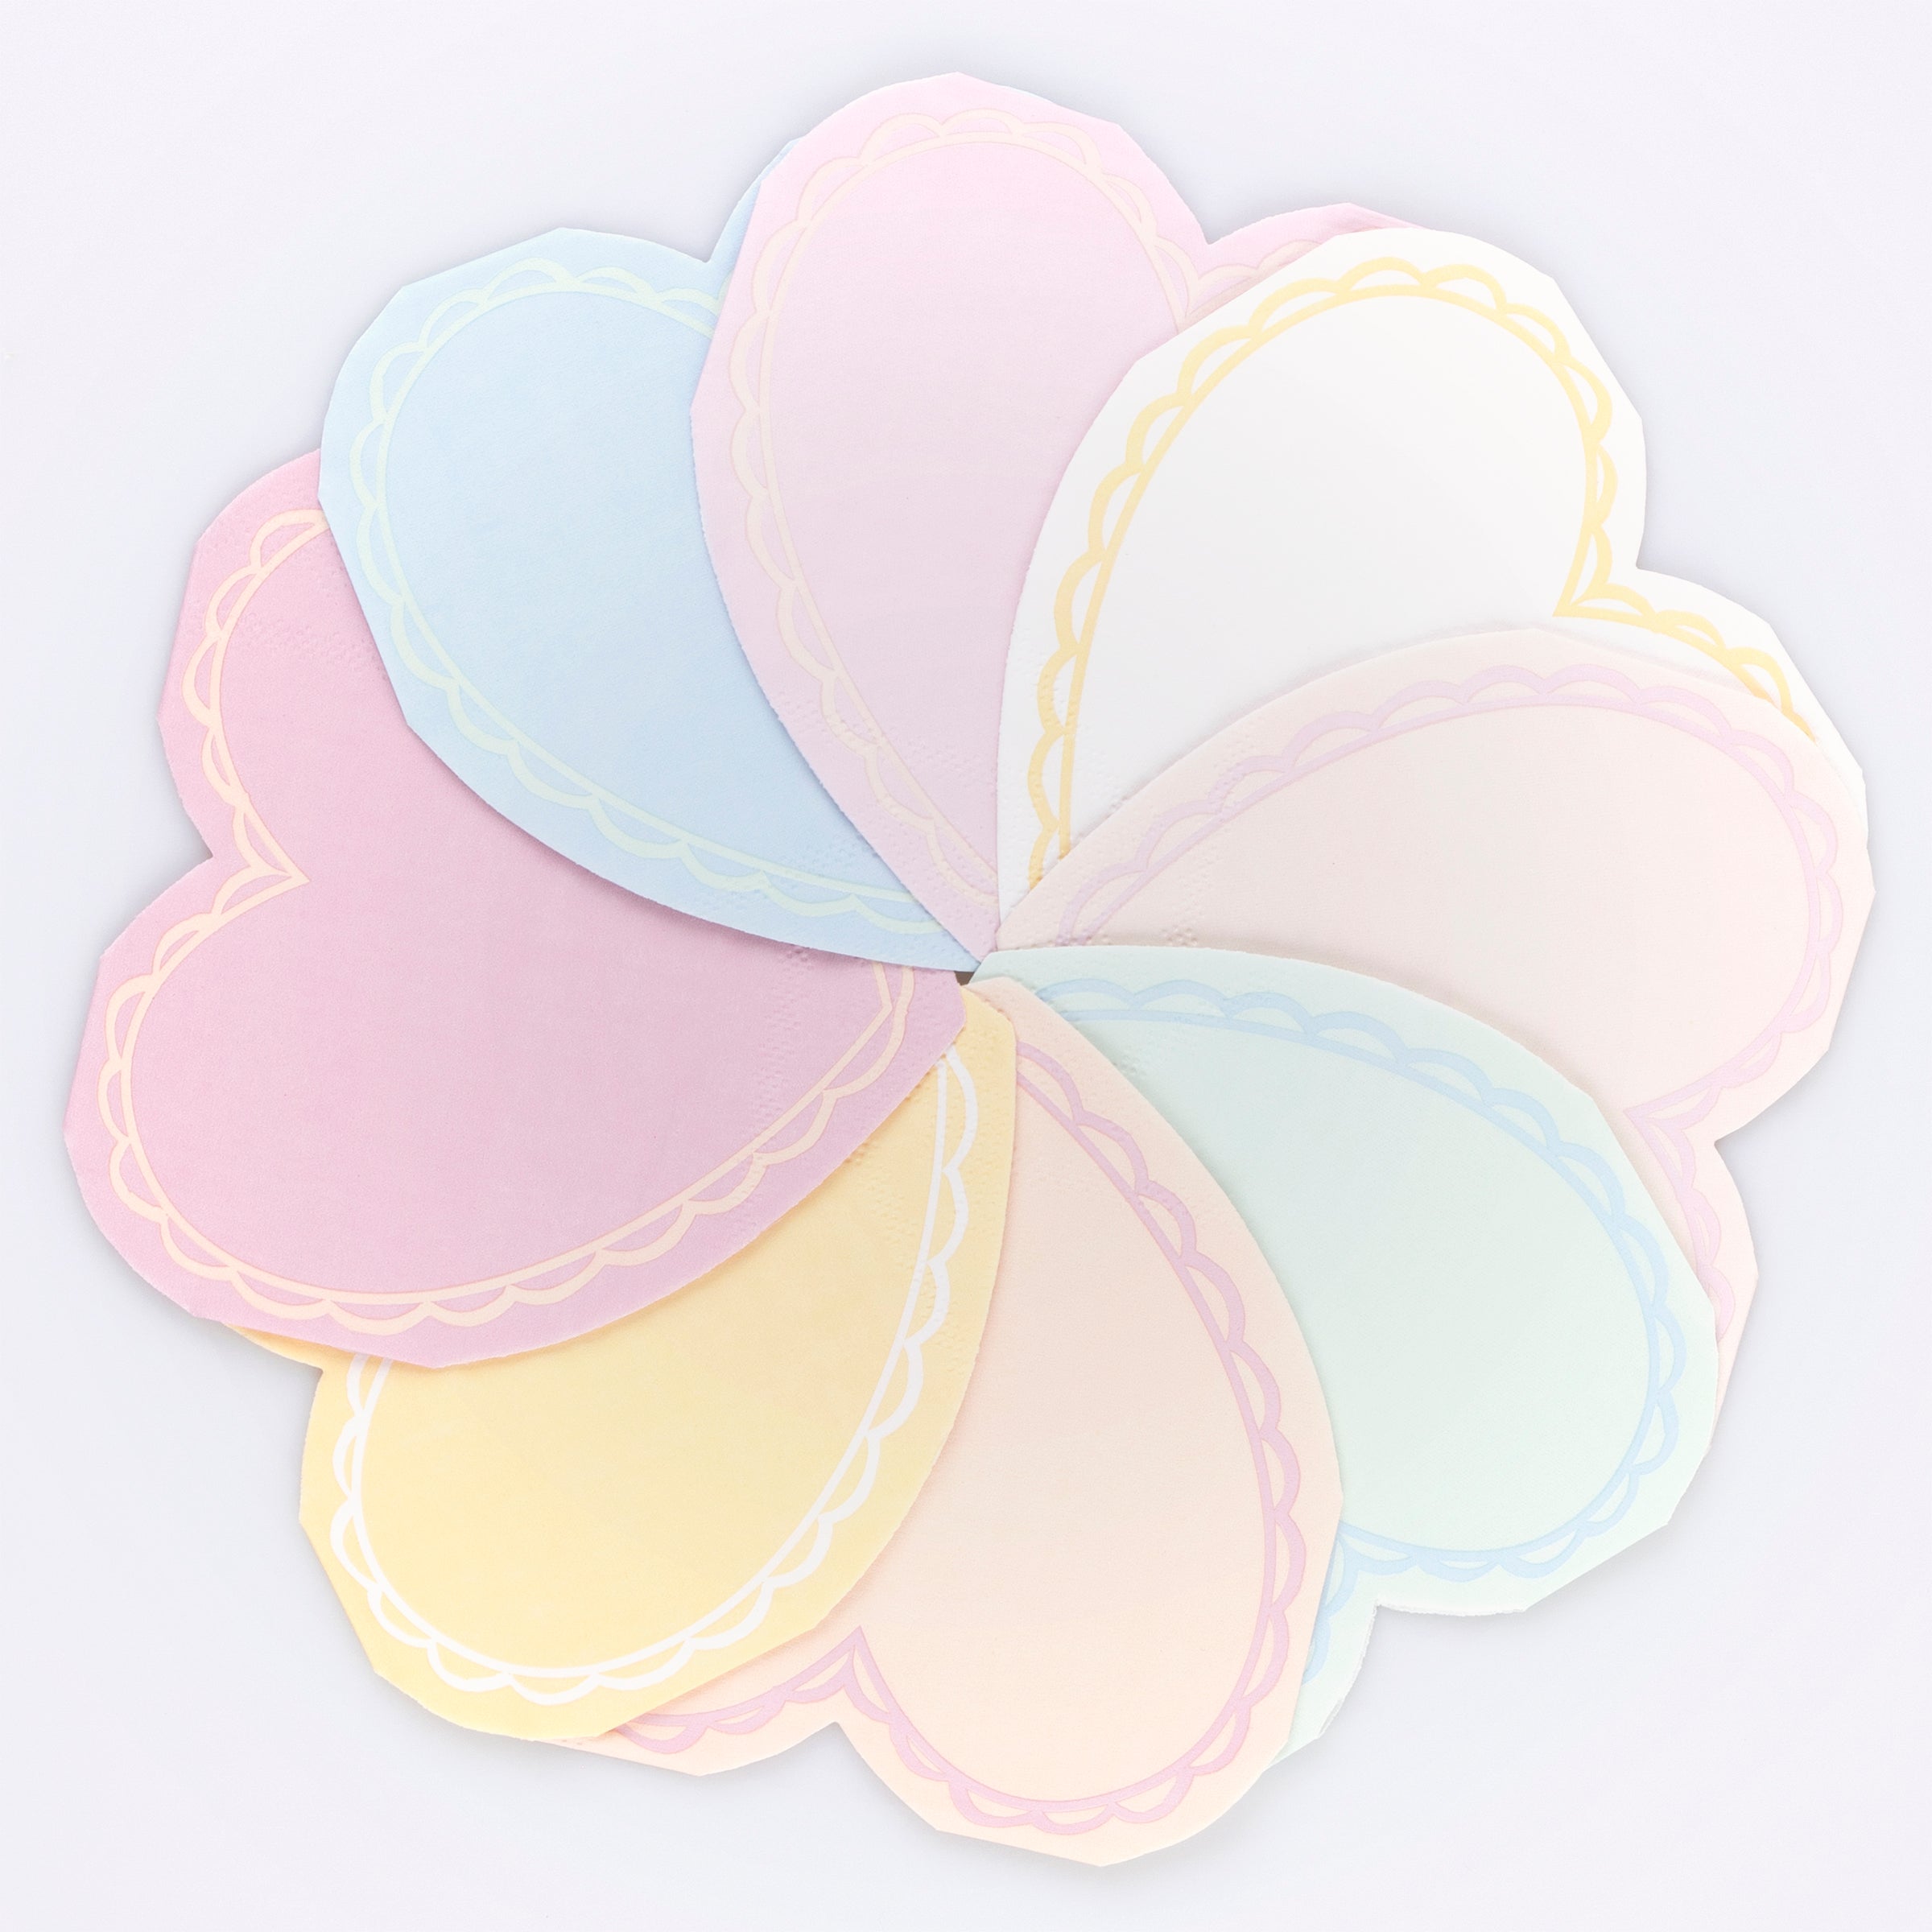 Our paper napkins, featuring pink napkins and other beautiful pastel shades, are heart shaped.